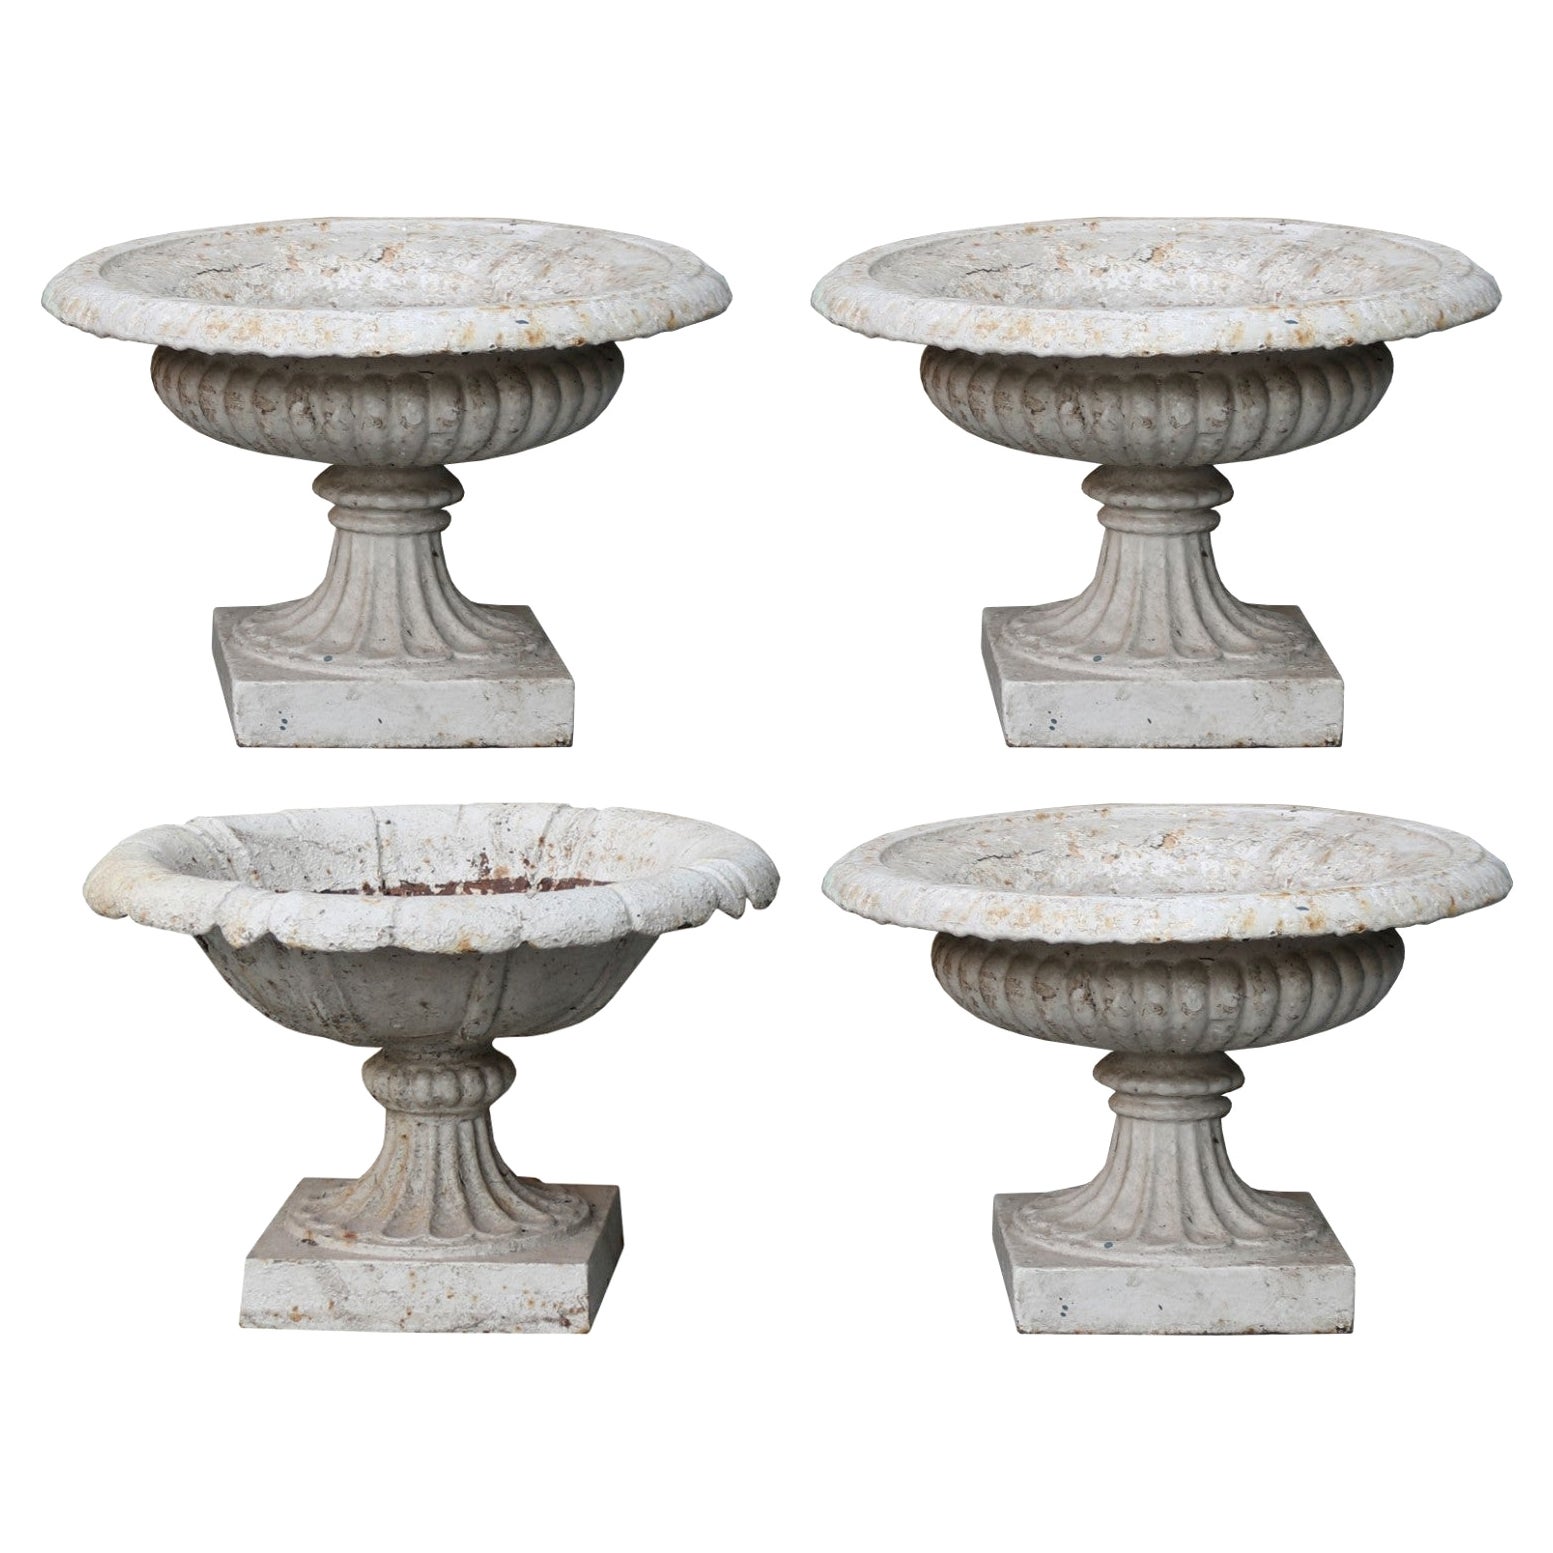 Four Antique Tazza Urns For Sale